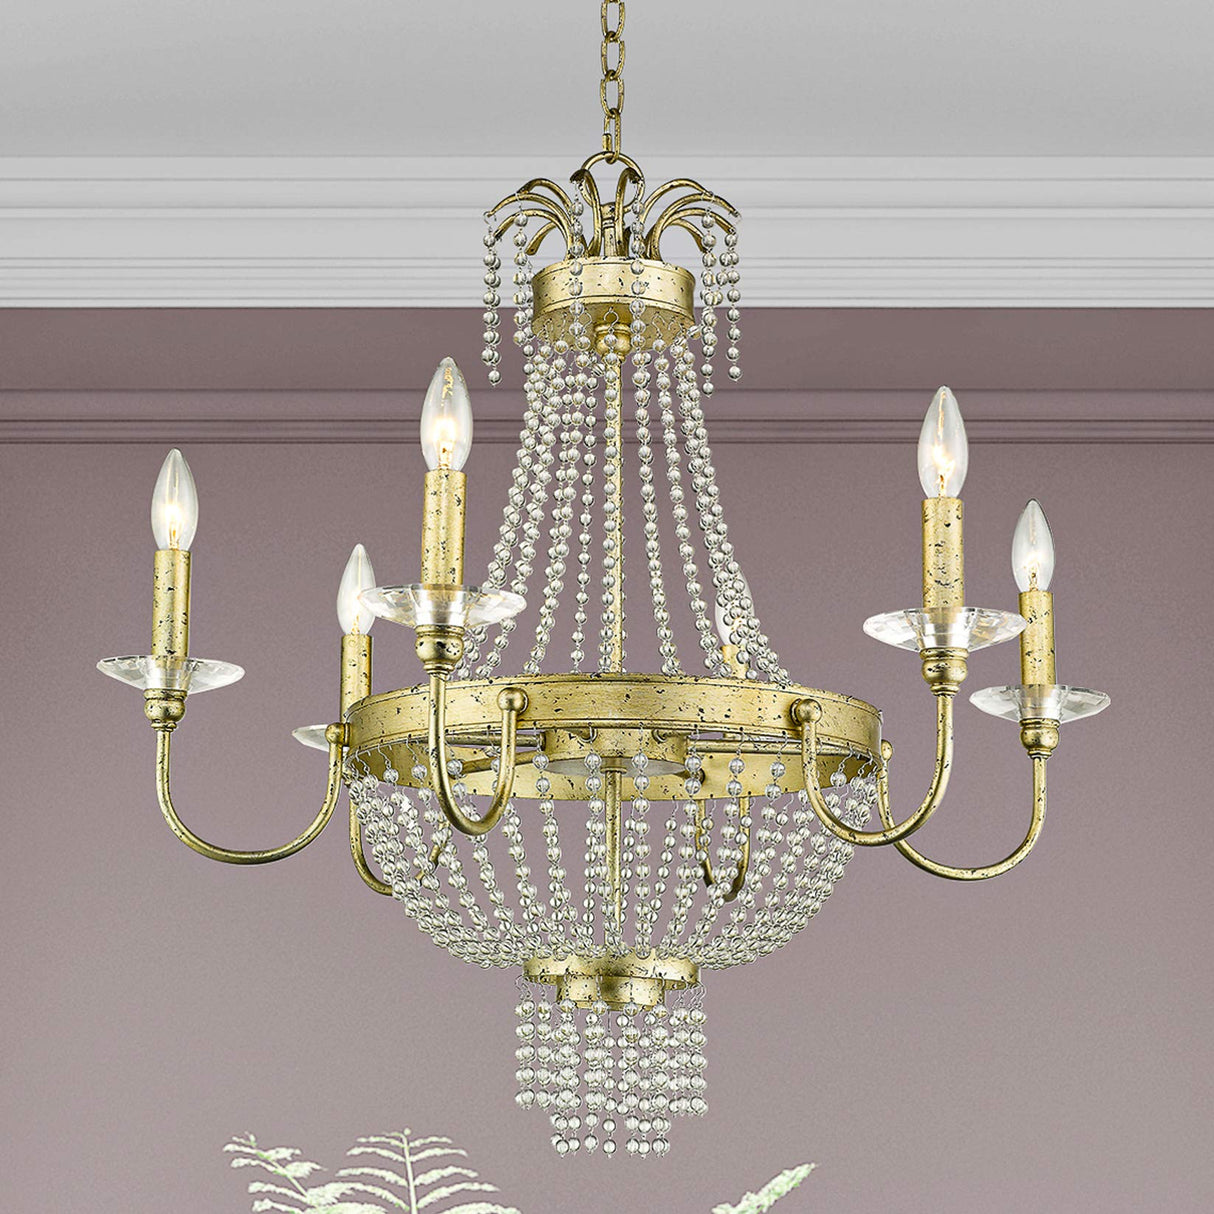 Livex Lighting 51846-28 Crystal Six Light Chandelier from Valentina Collection, Champ, Gld Leaf Finish, Hand Applied Winter Gold